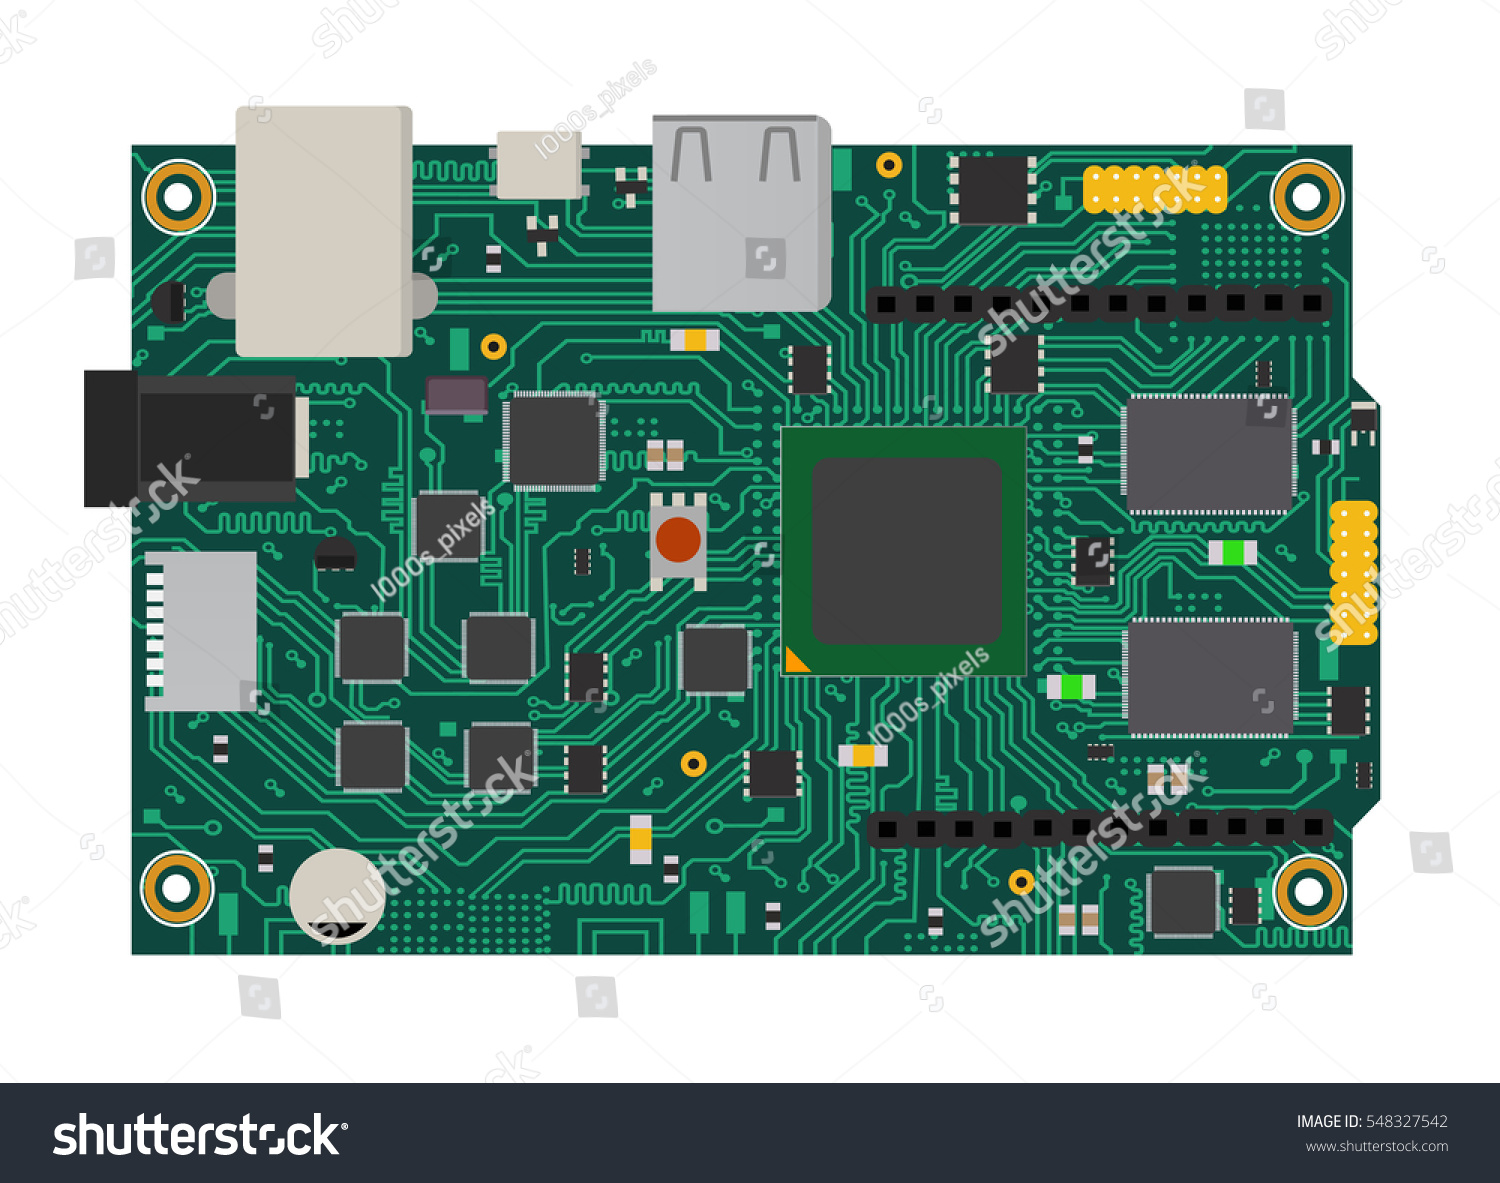 SVG of DIY electronic mega board with a micro-controller, LEDs, connectors, and other electronic components, to form the basic of smart home, robotic, and many other projects related to electronics. svg